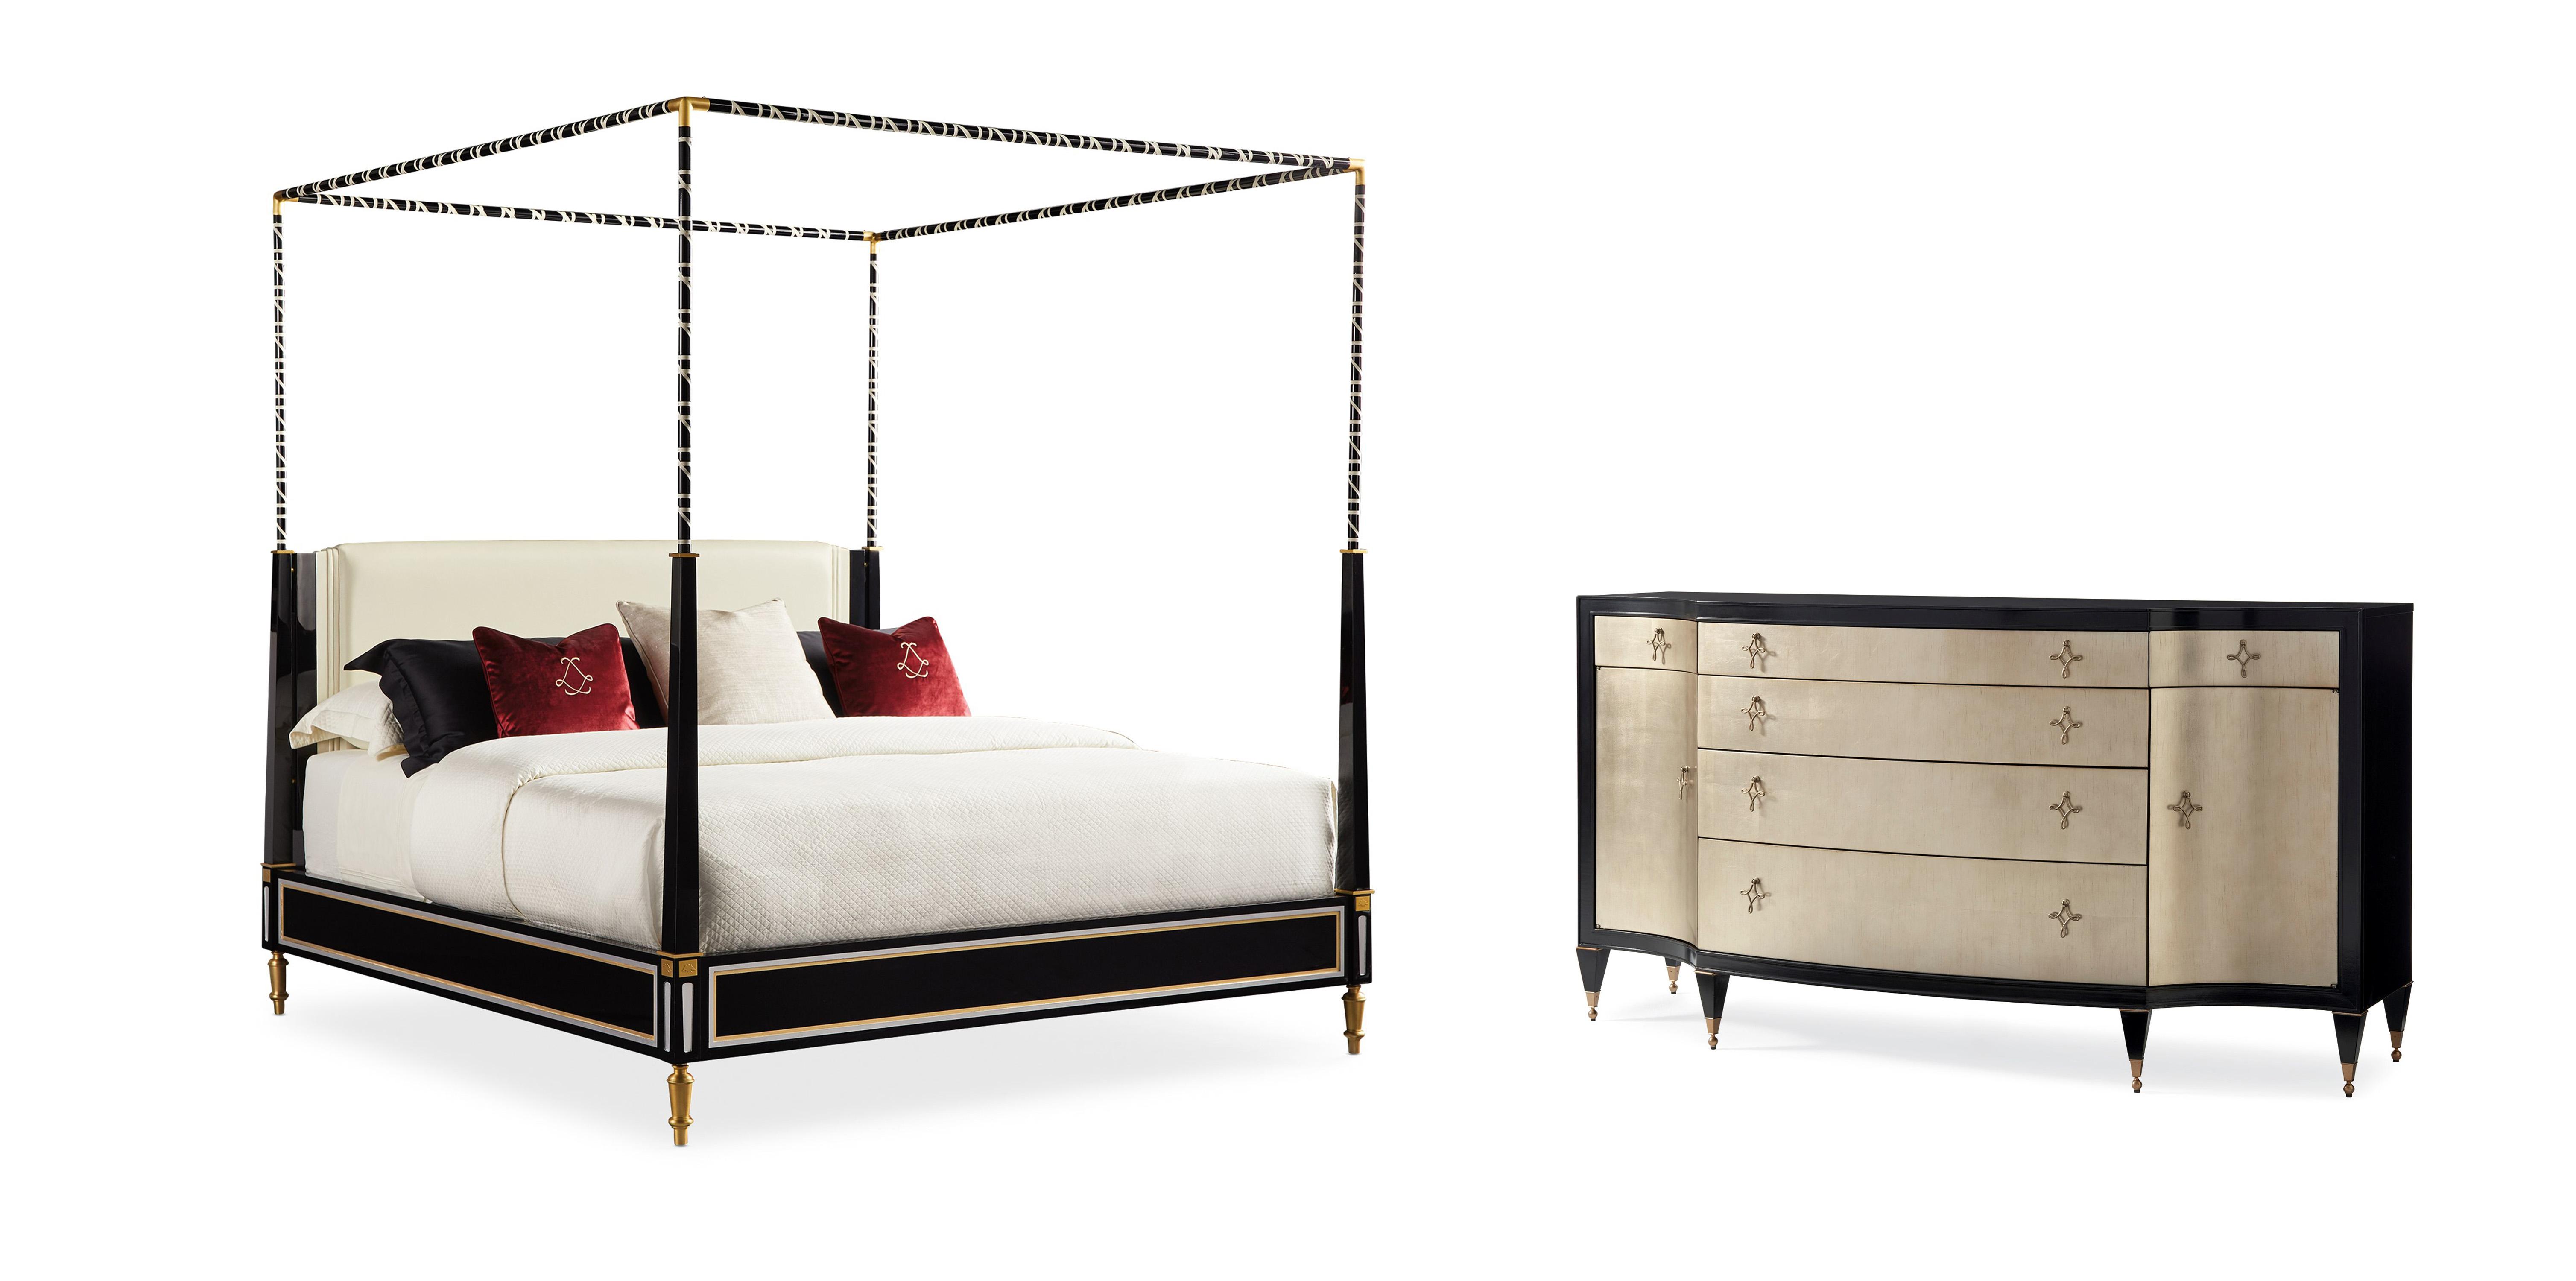 Contemporary Canopy Bedroom Set THE COUTURIER CANOPY BED / OPPOSITES ATTRACT SIG-419-122-Set-2 in Black Finish, Cream Leather